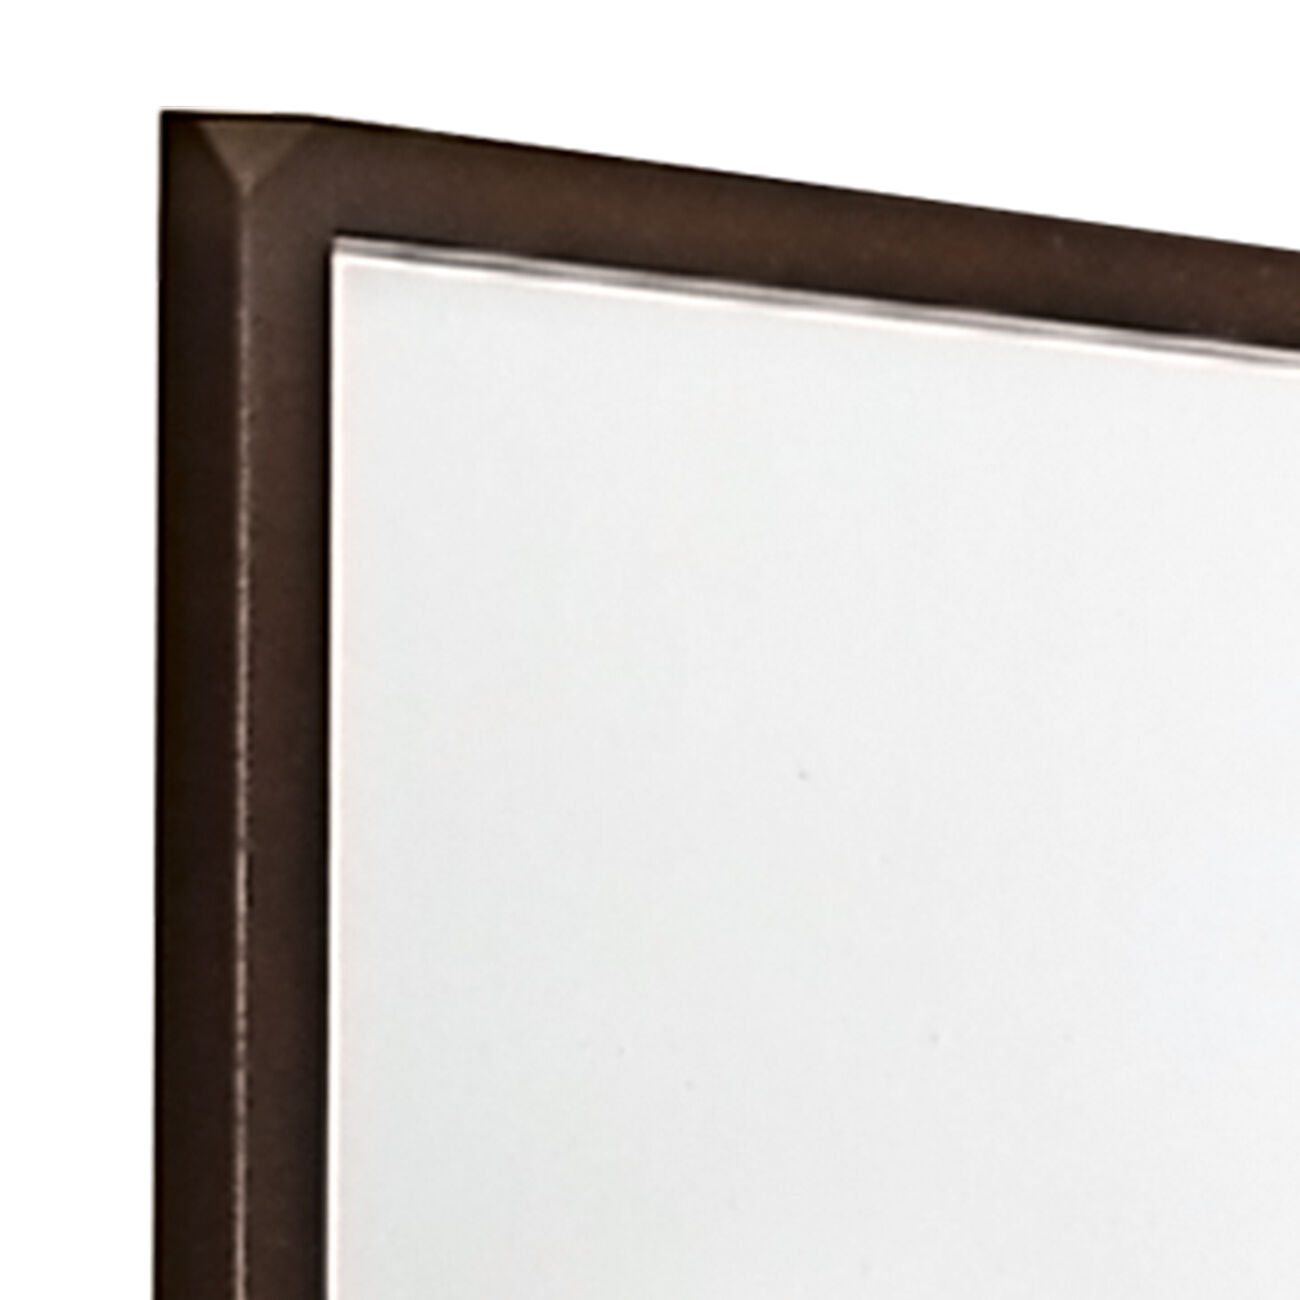 Wooden Dresser Top Mirror with Chiseled Edges, Cherry Brown and Silver